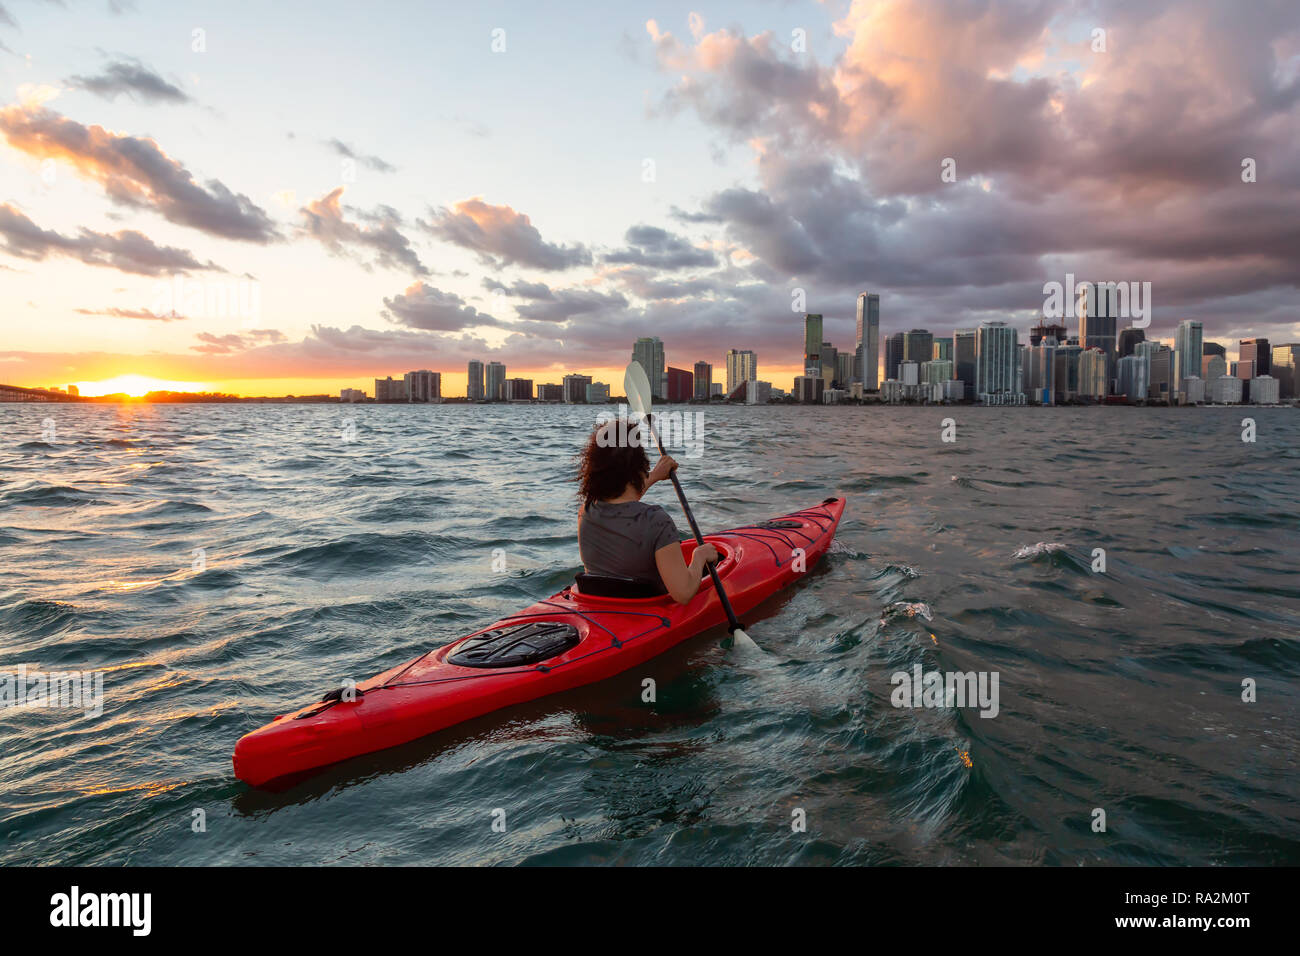 Adventurous girl kayaking in front of a modern Downtown Cityscape during a dramatic sunset. Taken in Miami, Florida, United States of America. Stock Photo